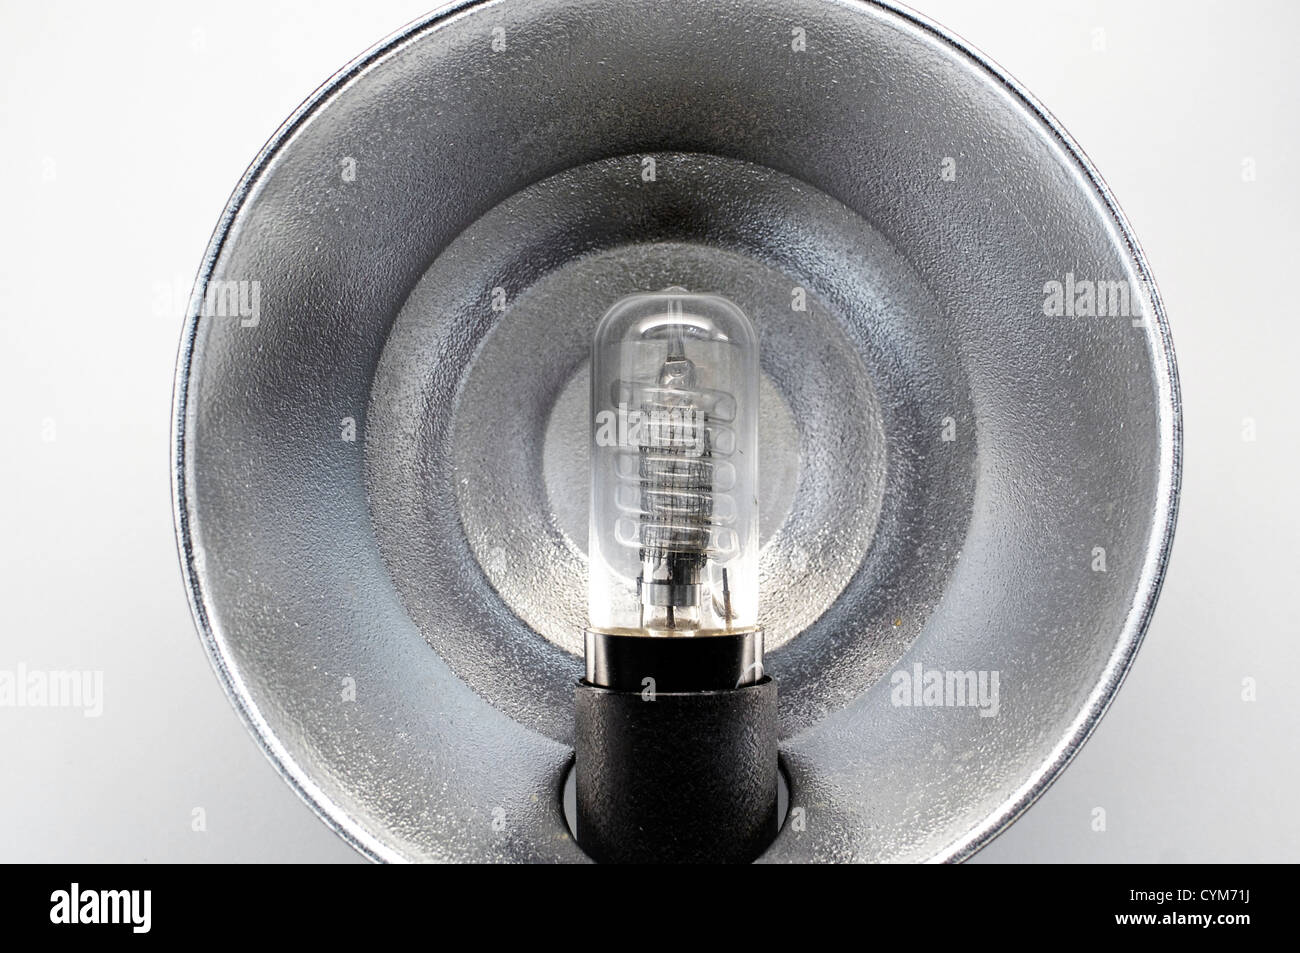 Large, odl fashioned flash, as used on top of reporter's cameras Stock Photo